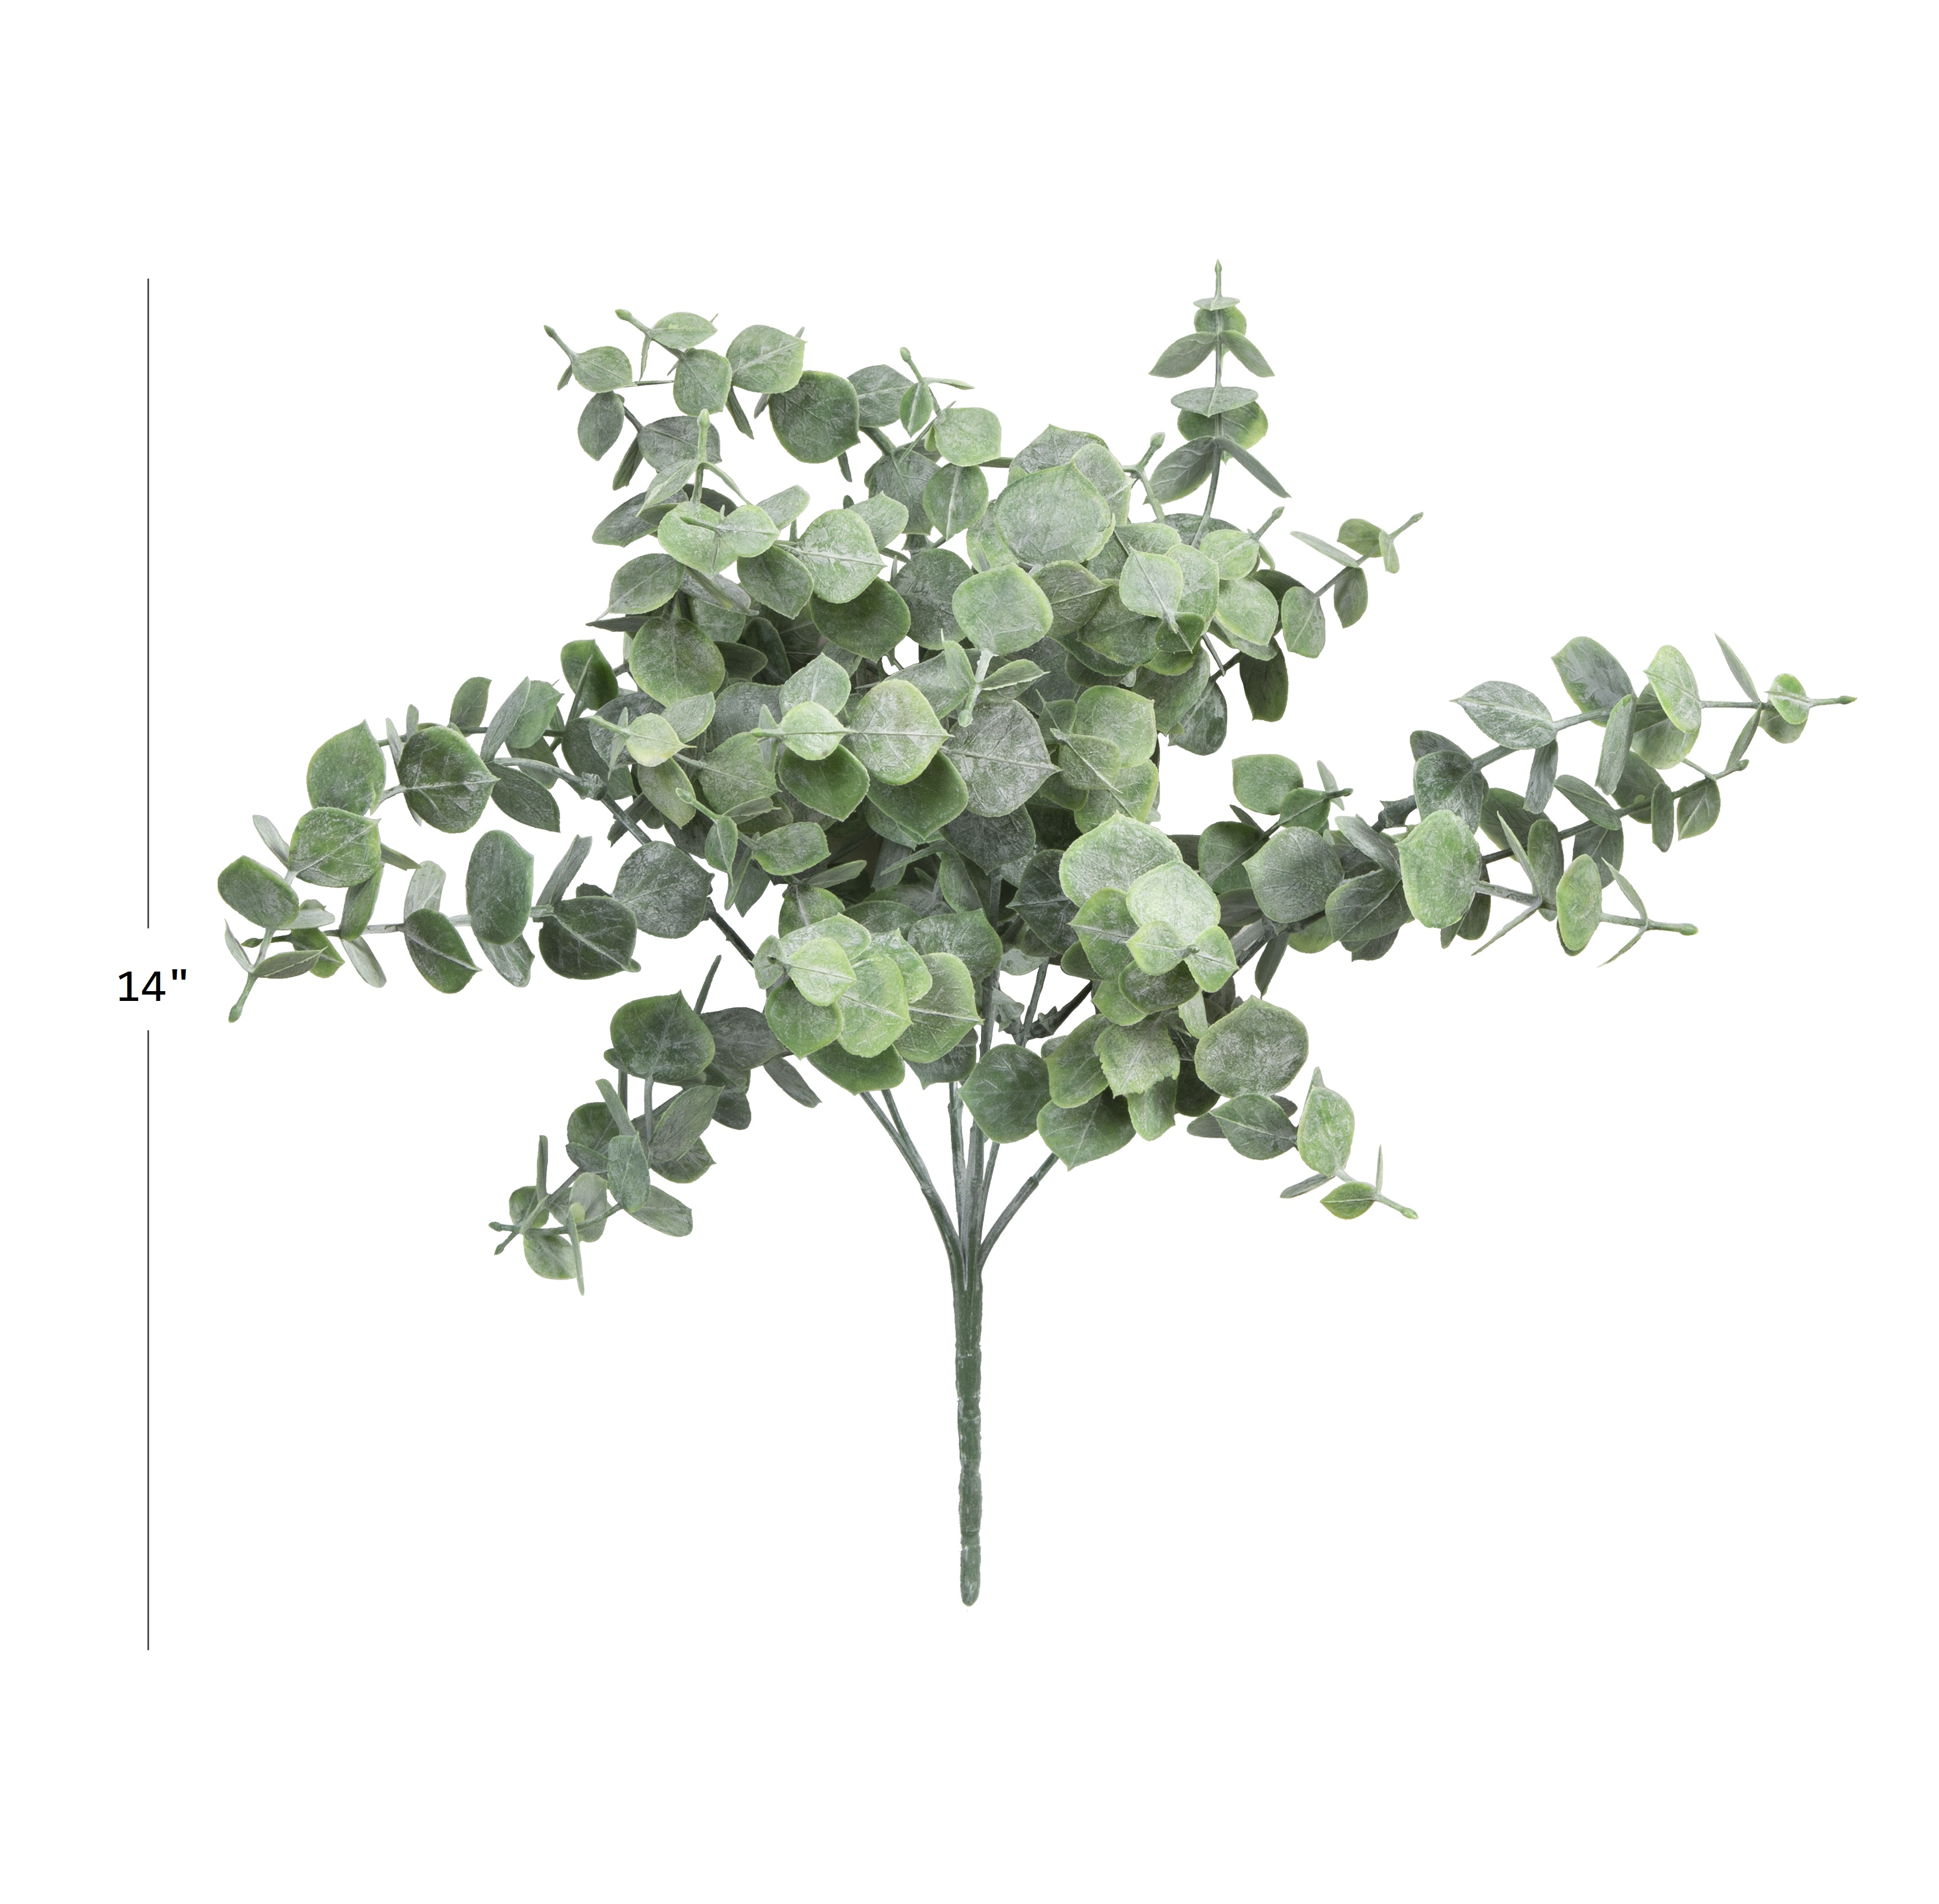 Mainstays Artificial Plants, 14" Flocked Green Eucalyptus Pick - image 5 of 5